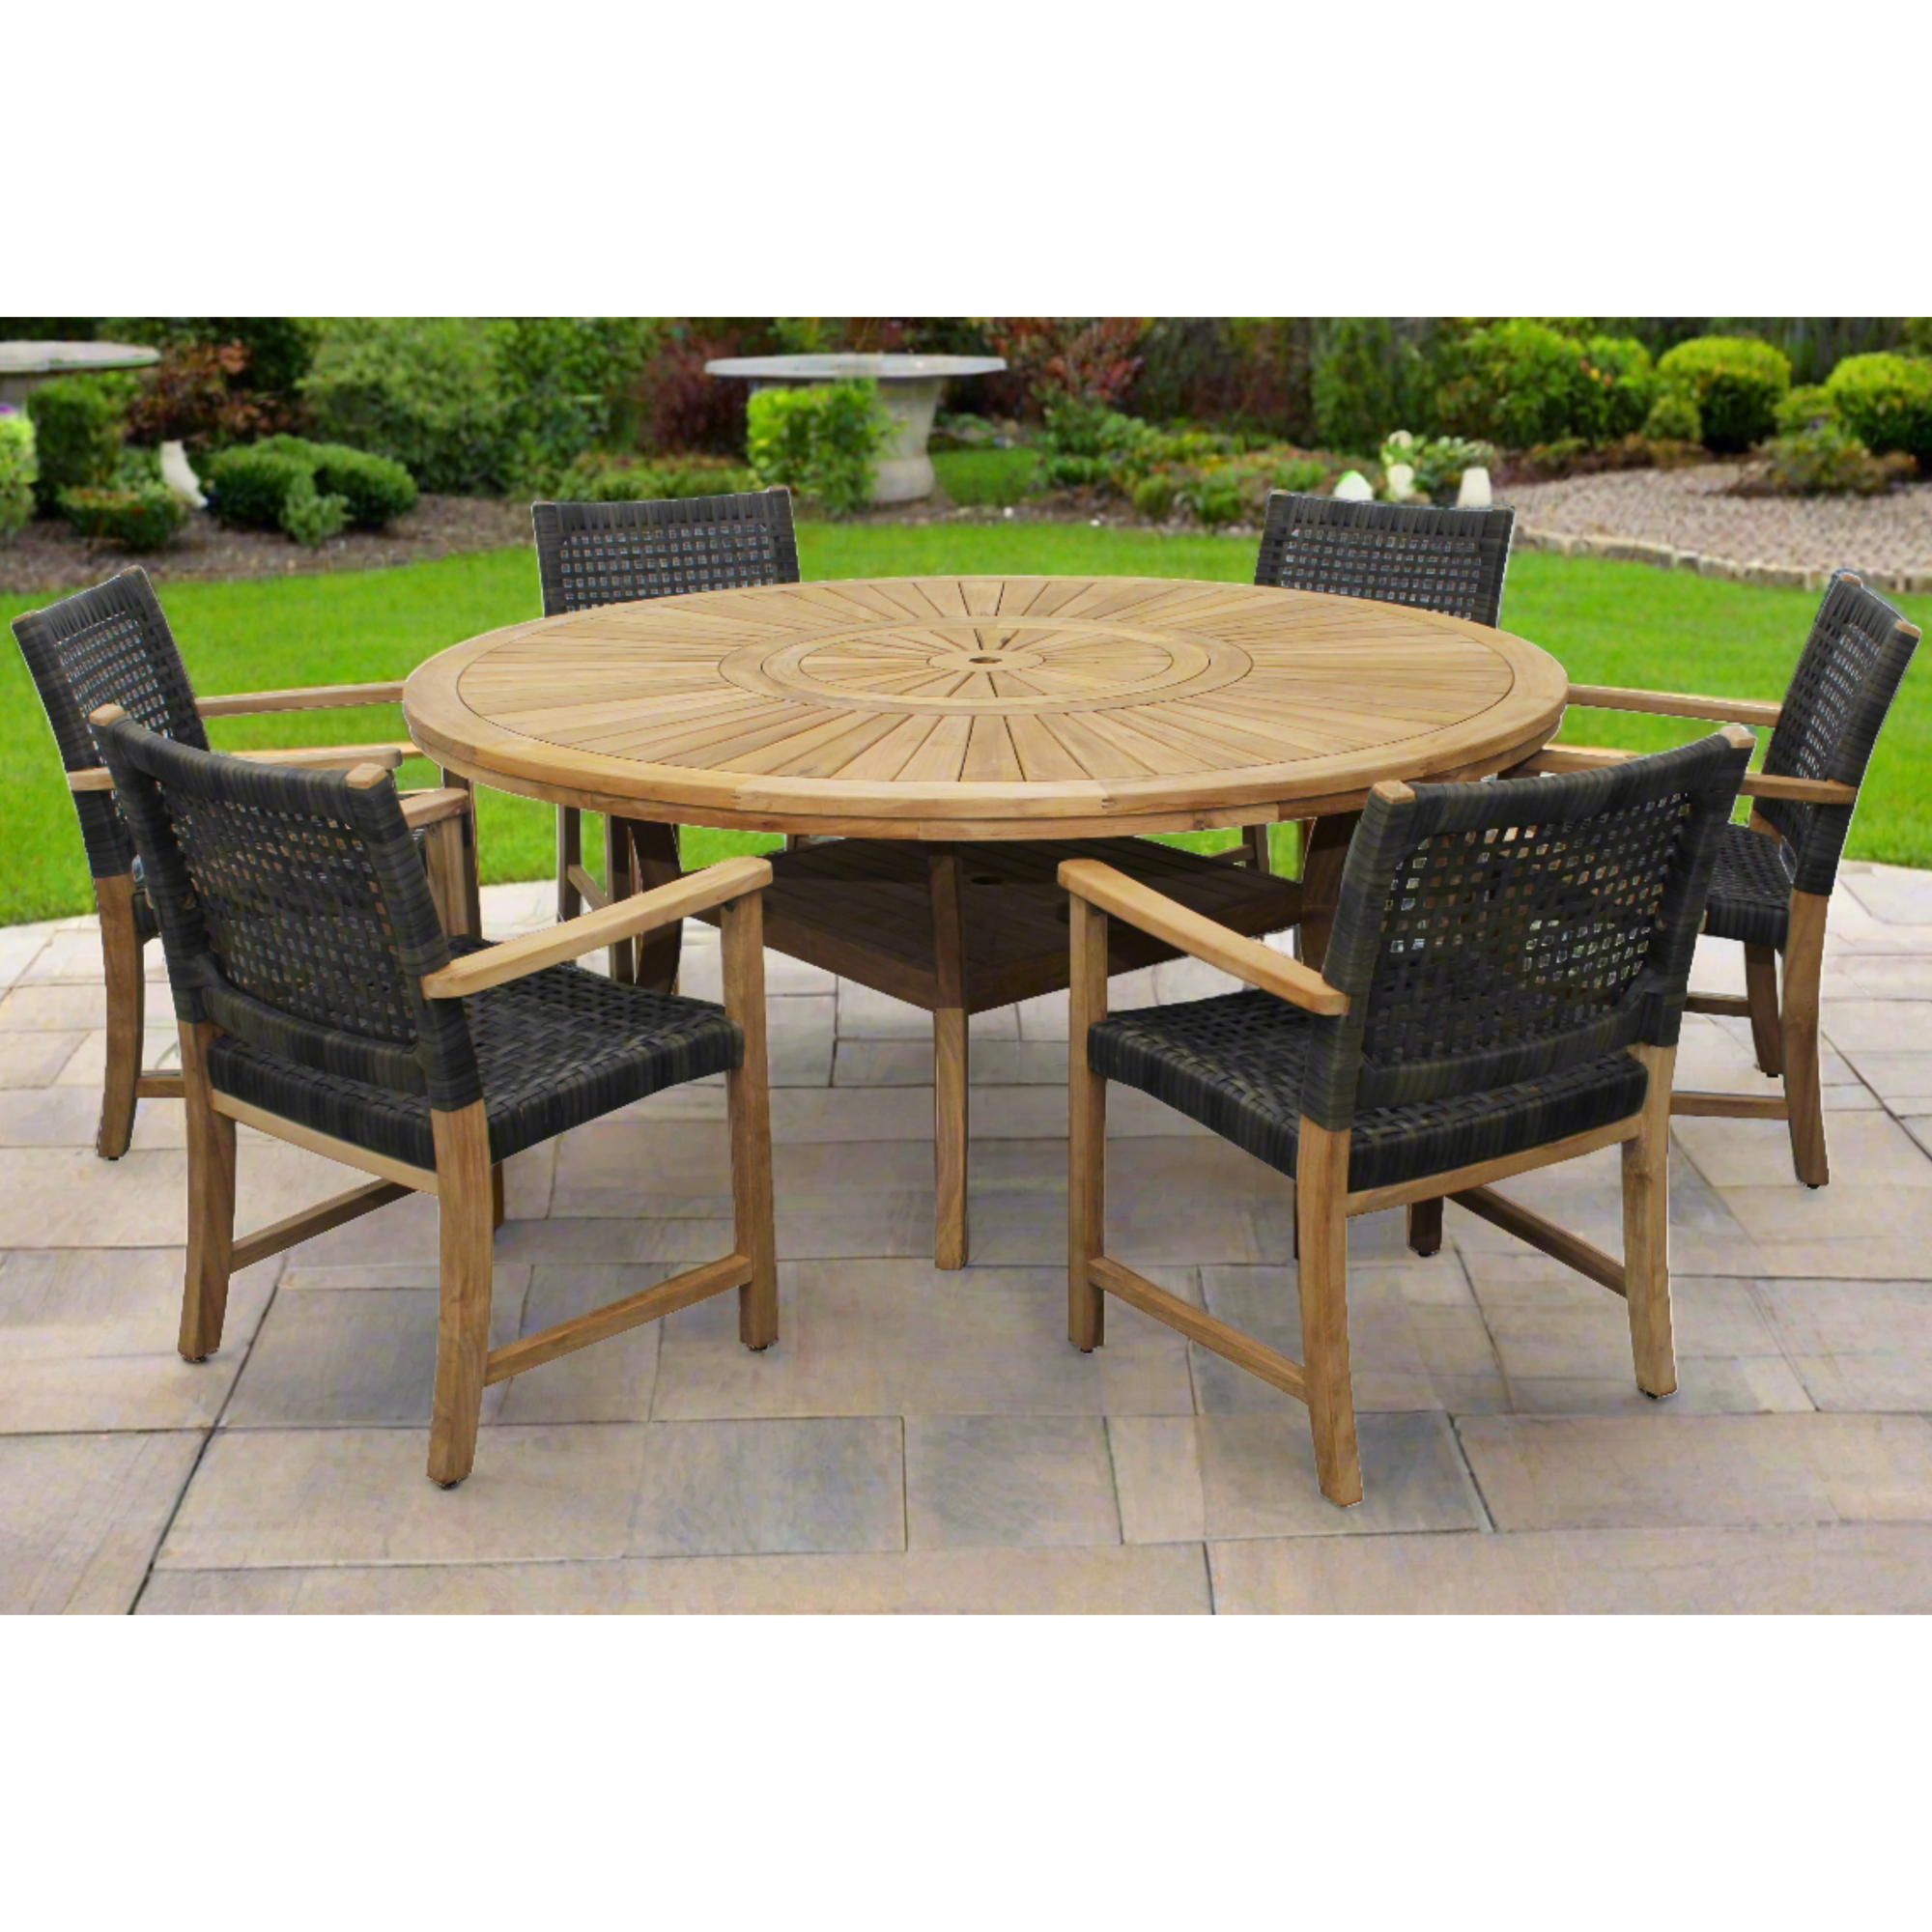 Komodo Teak 7pc Outdoor Dining Set (Teak 70" Round Table w Built-in Lazy Susan with 6 Woven Sanur Armchairs)